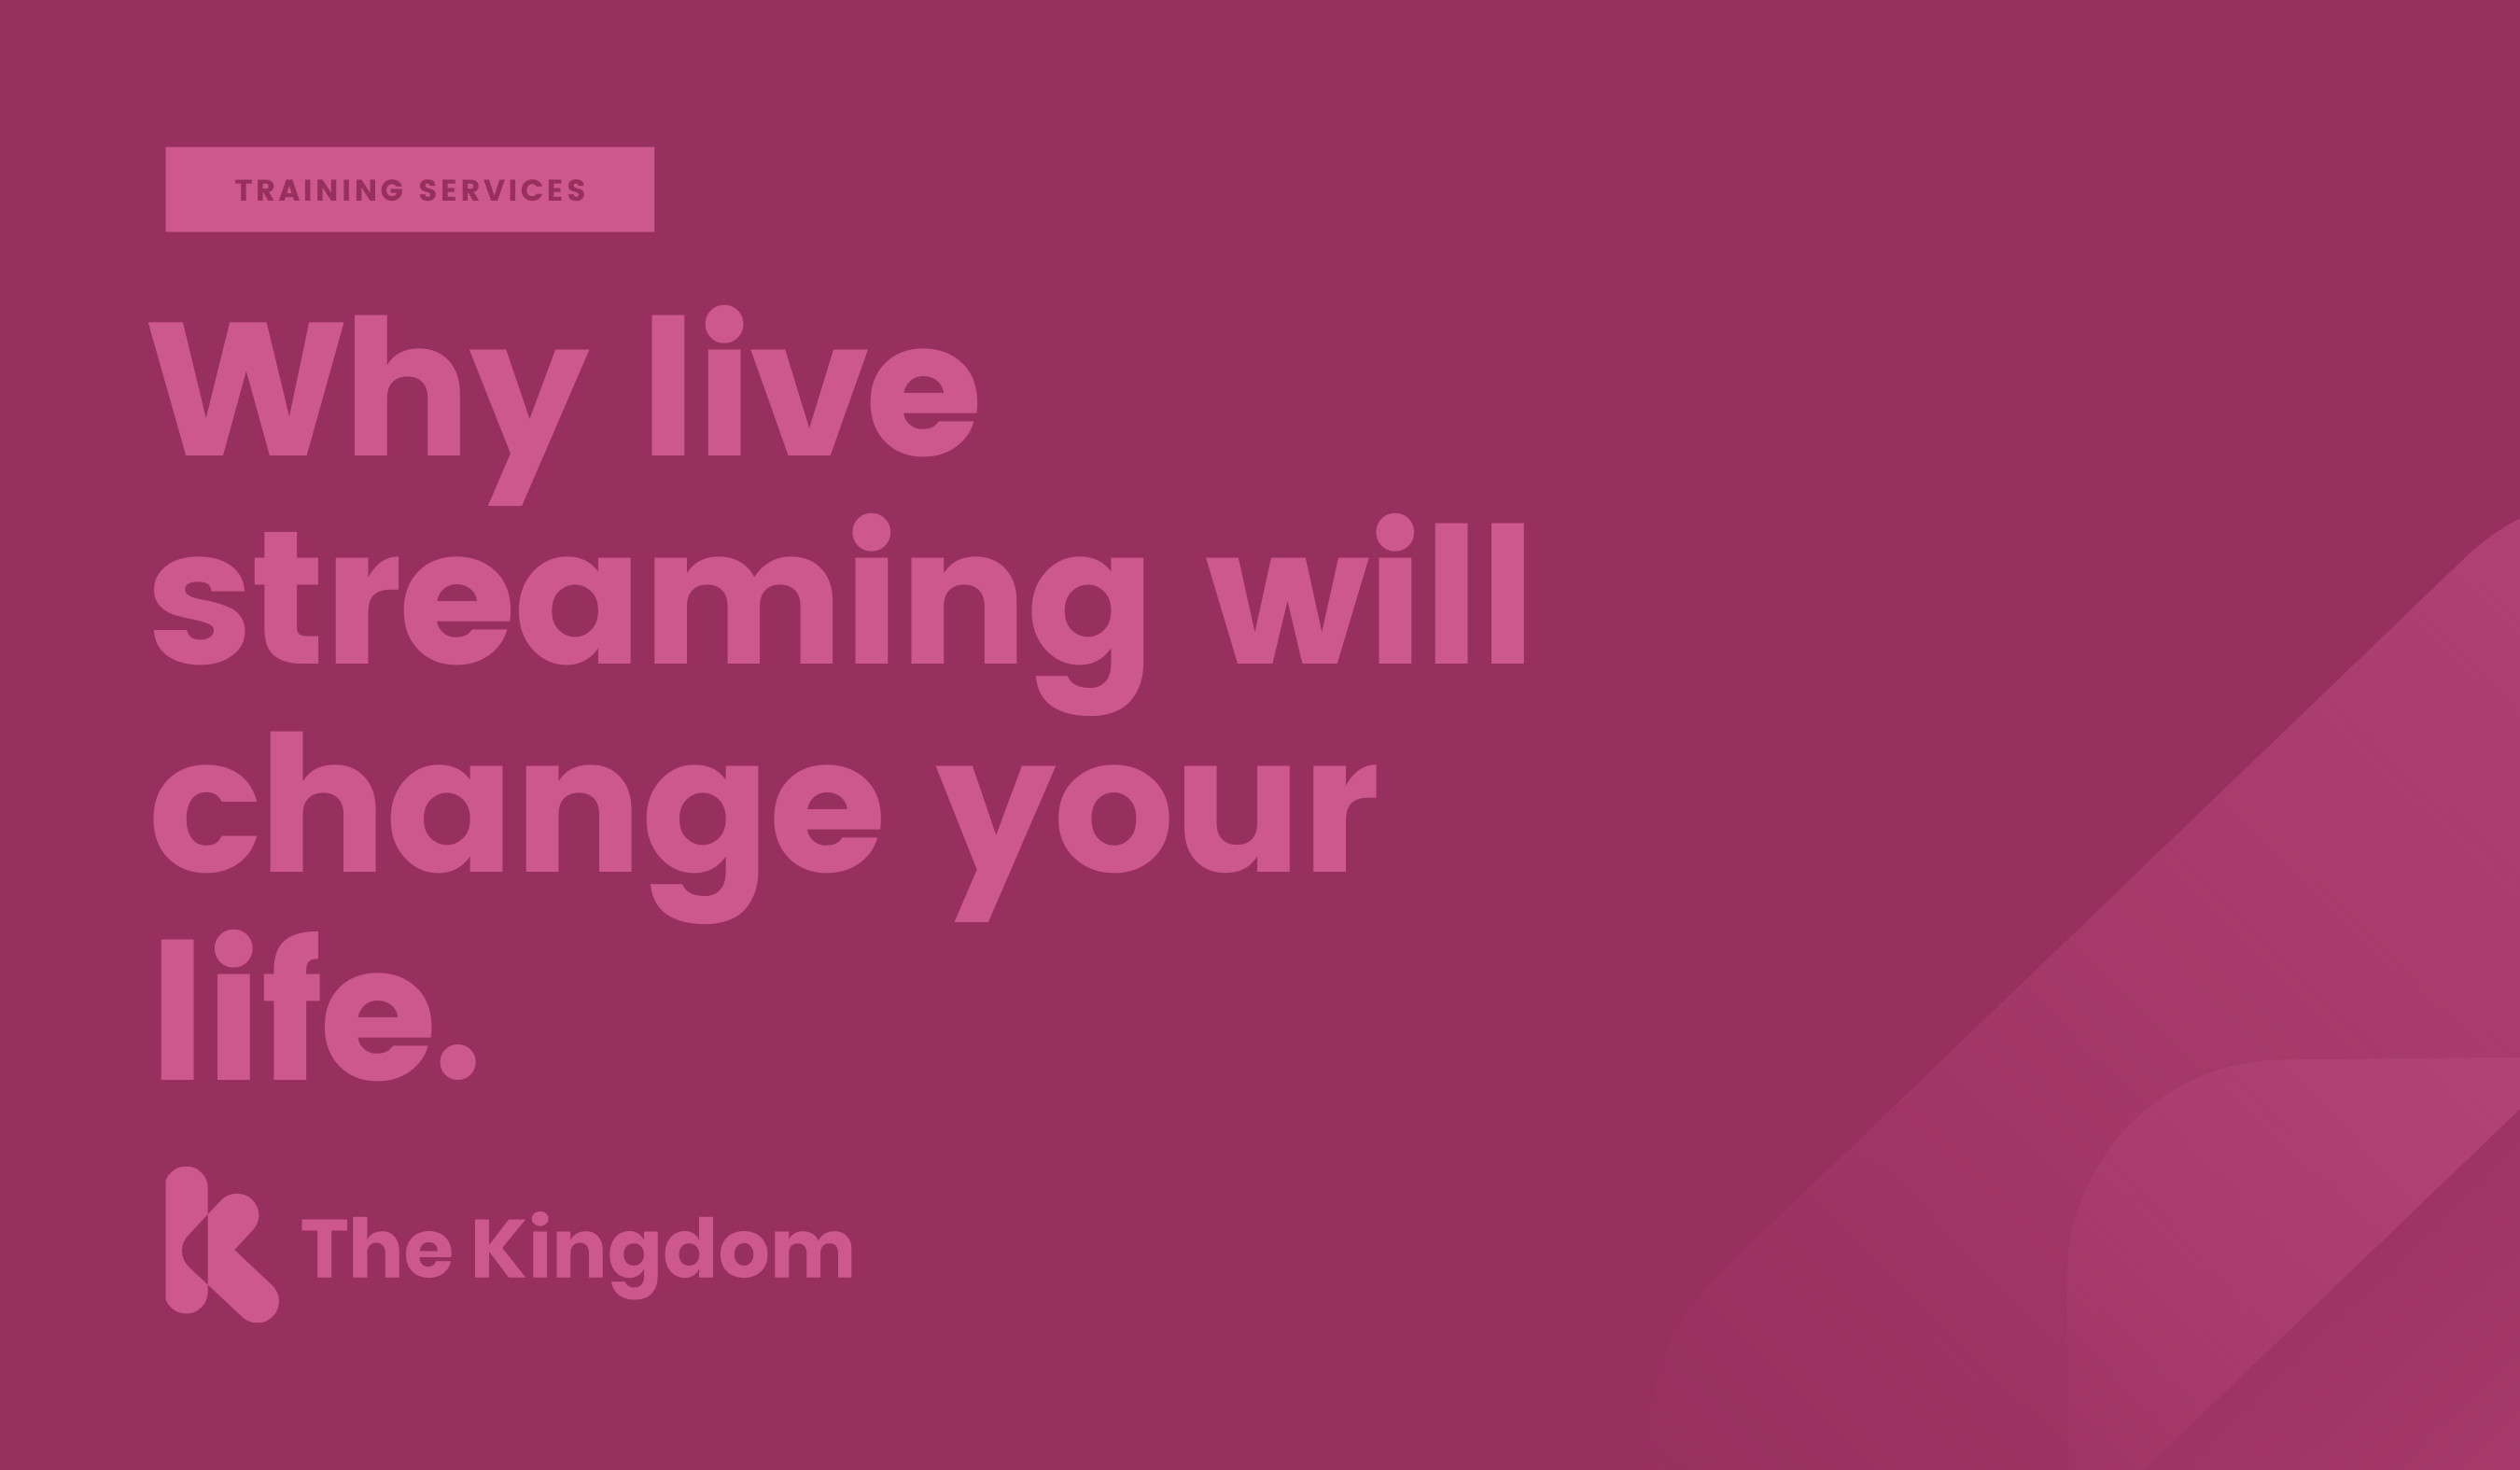 Why live streaming will change your life